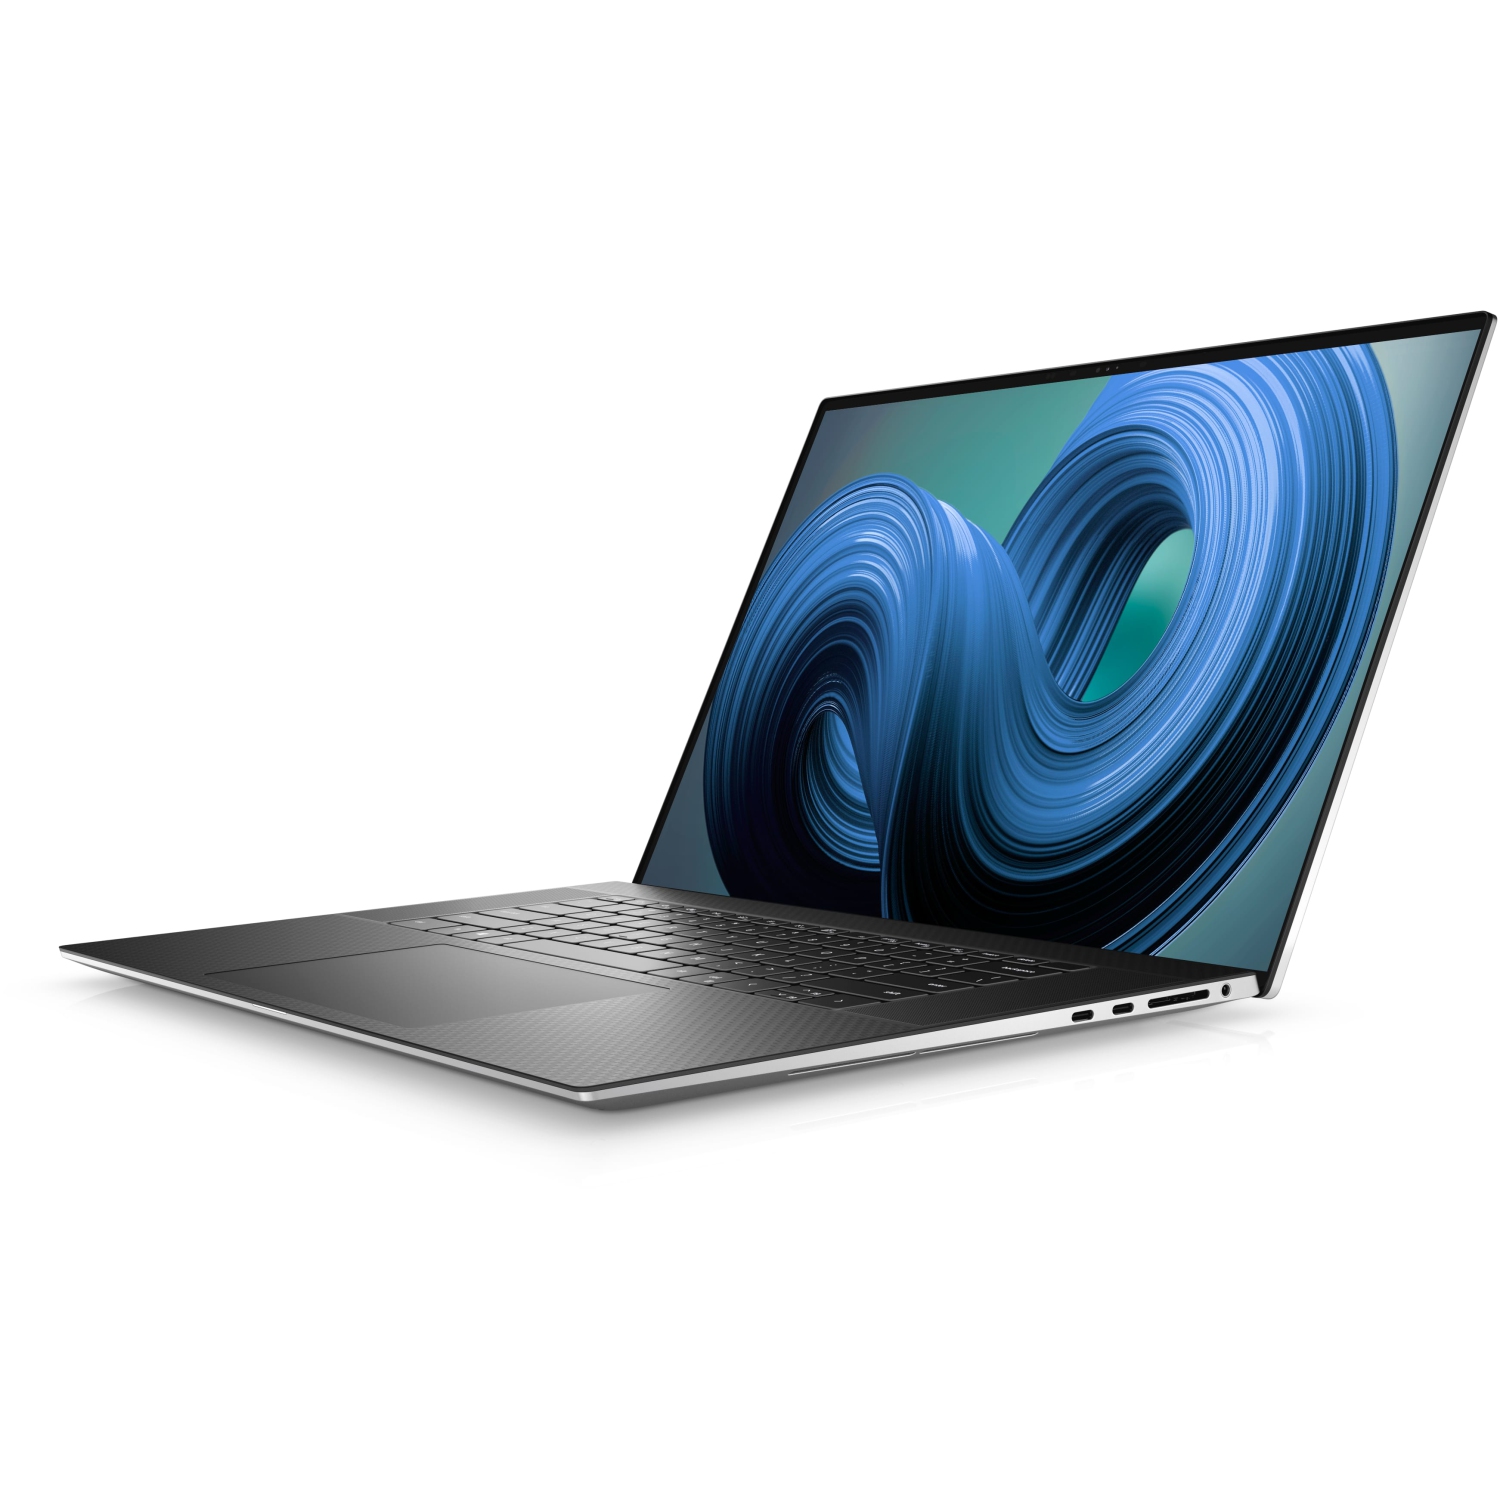 Refurbished (Excellent) – Dell XPS 9720 Laptop (2022) | 17" 4K Touch | Core i7 - 2TB SSD - 64GB RAM - RTX 3060 | 14 Cores @ 4.7 GHz - 12th Gen CPU - 12GB GDDR6